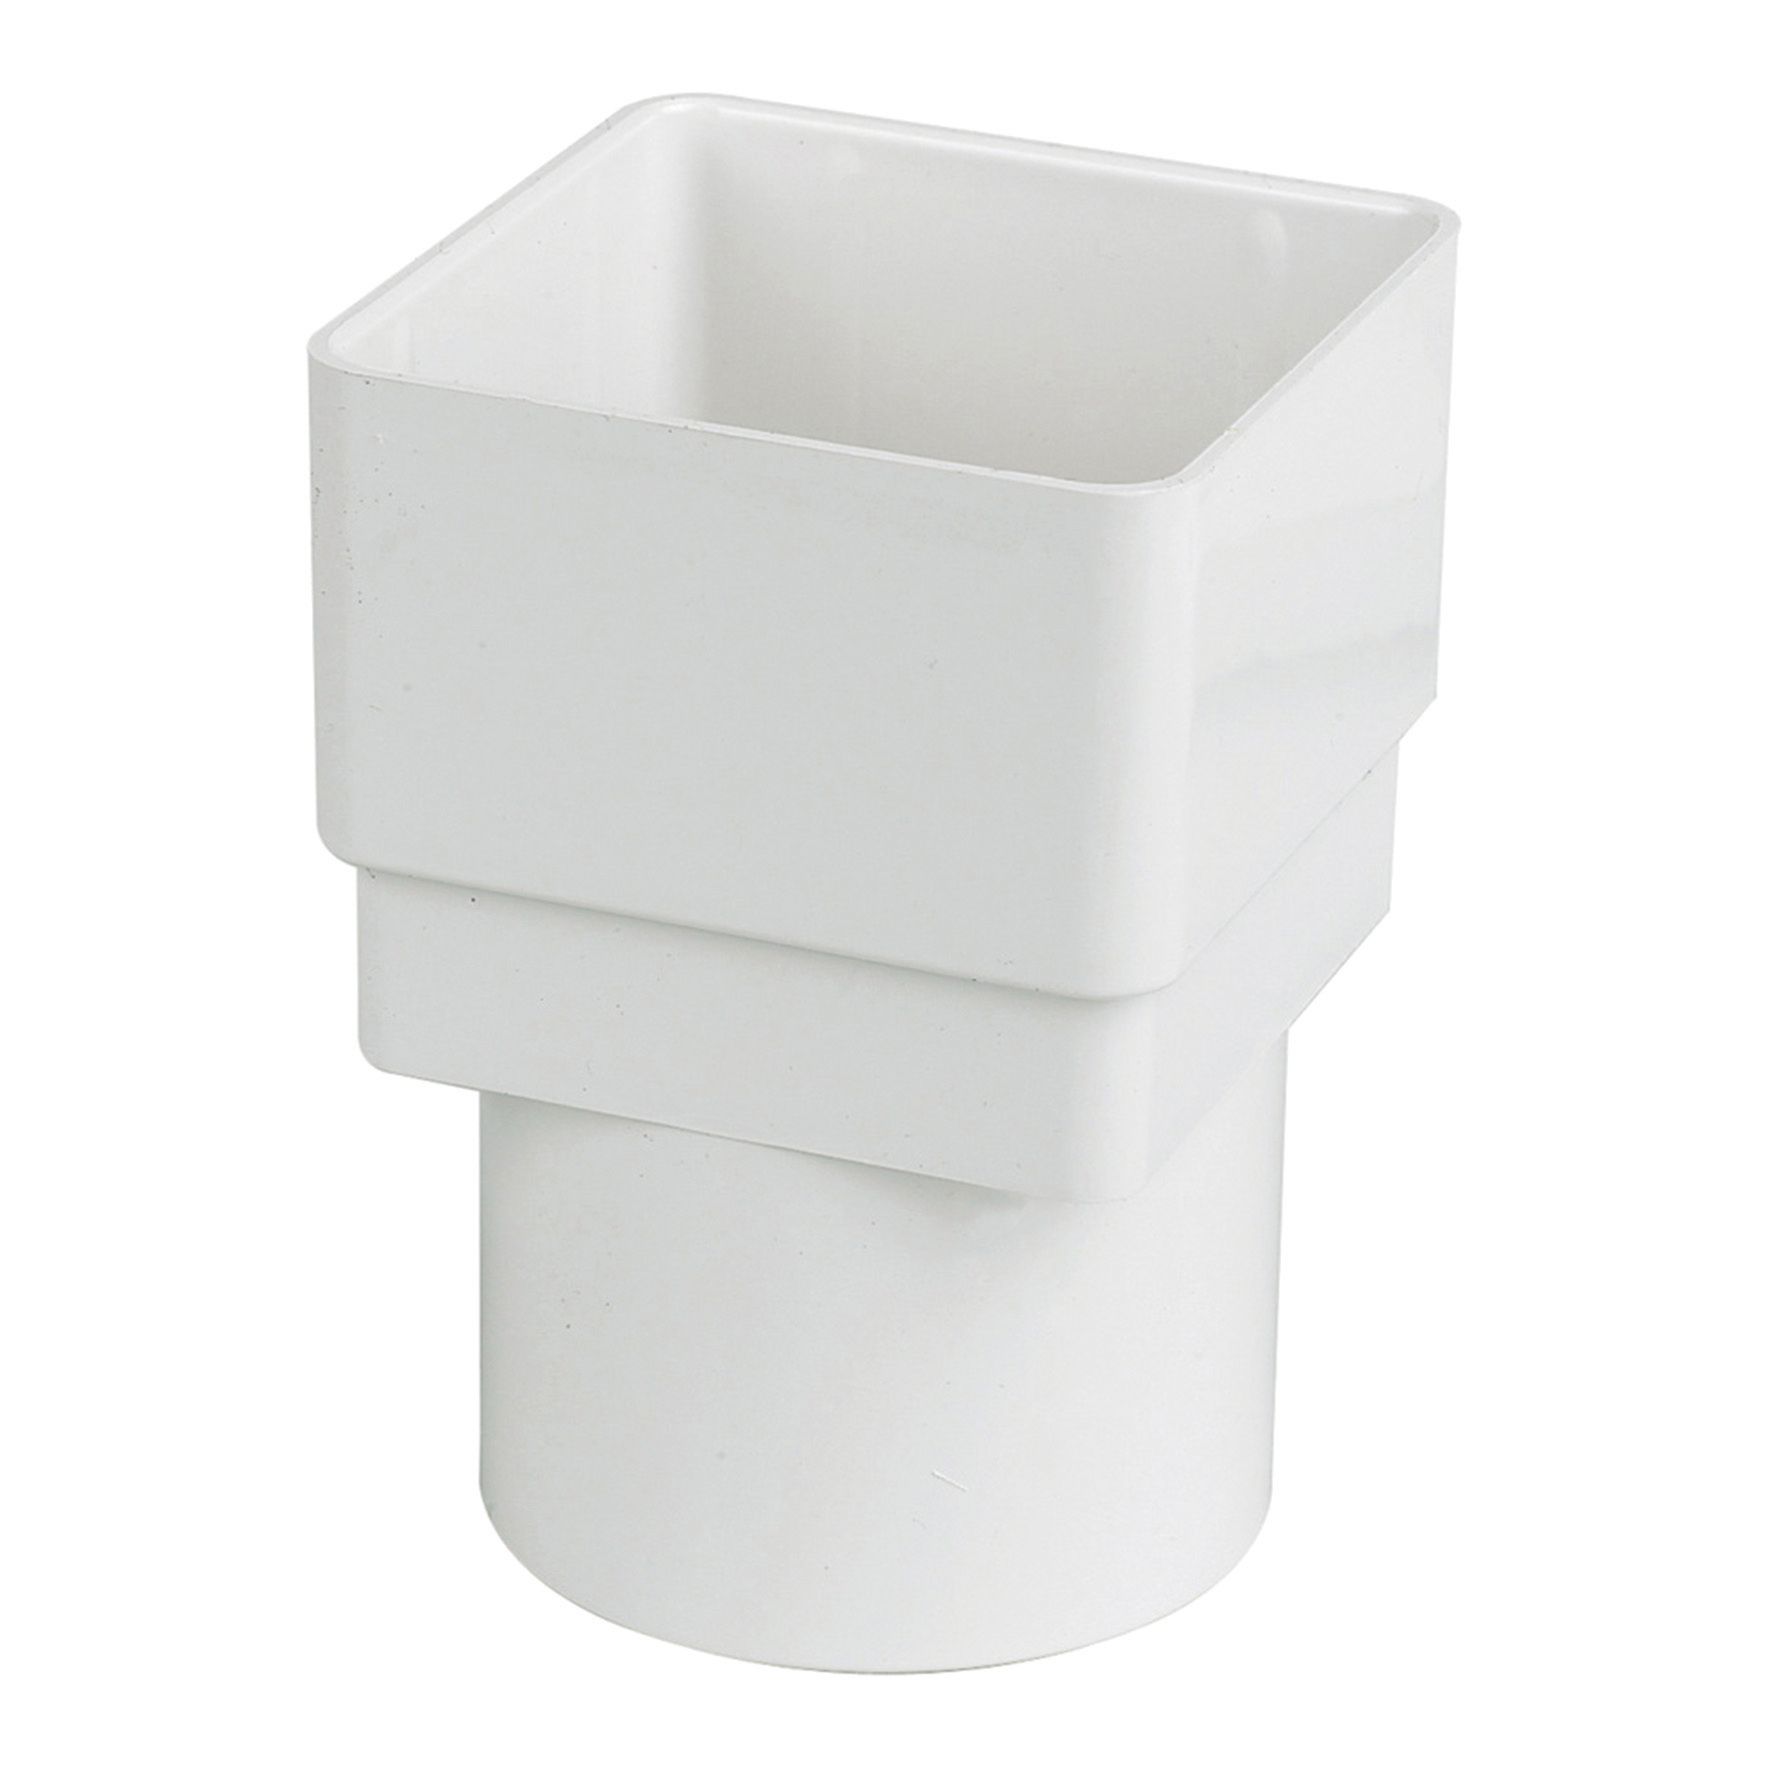 Image of FloPlast Square to Round Downpipe Adaptor - White